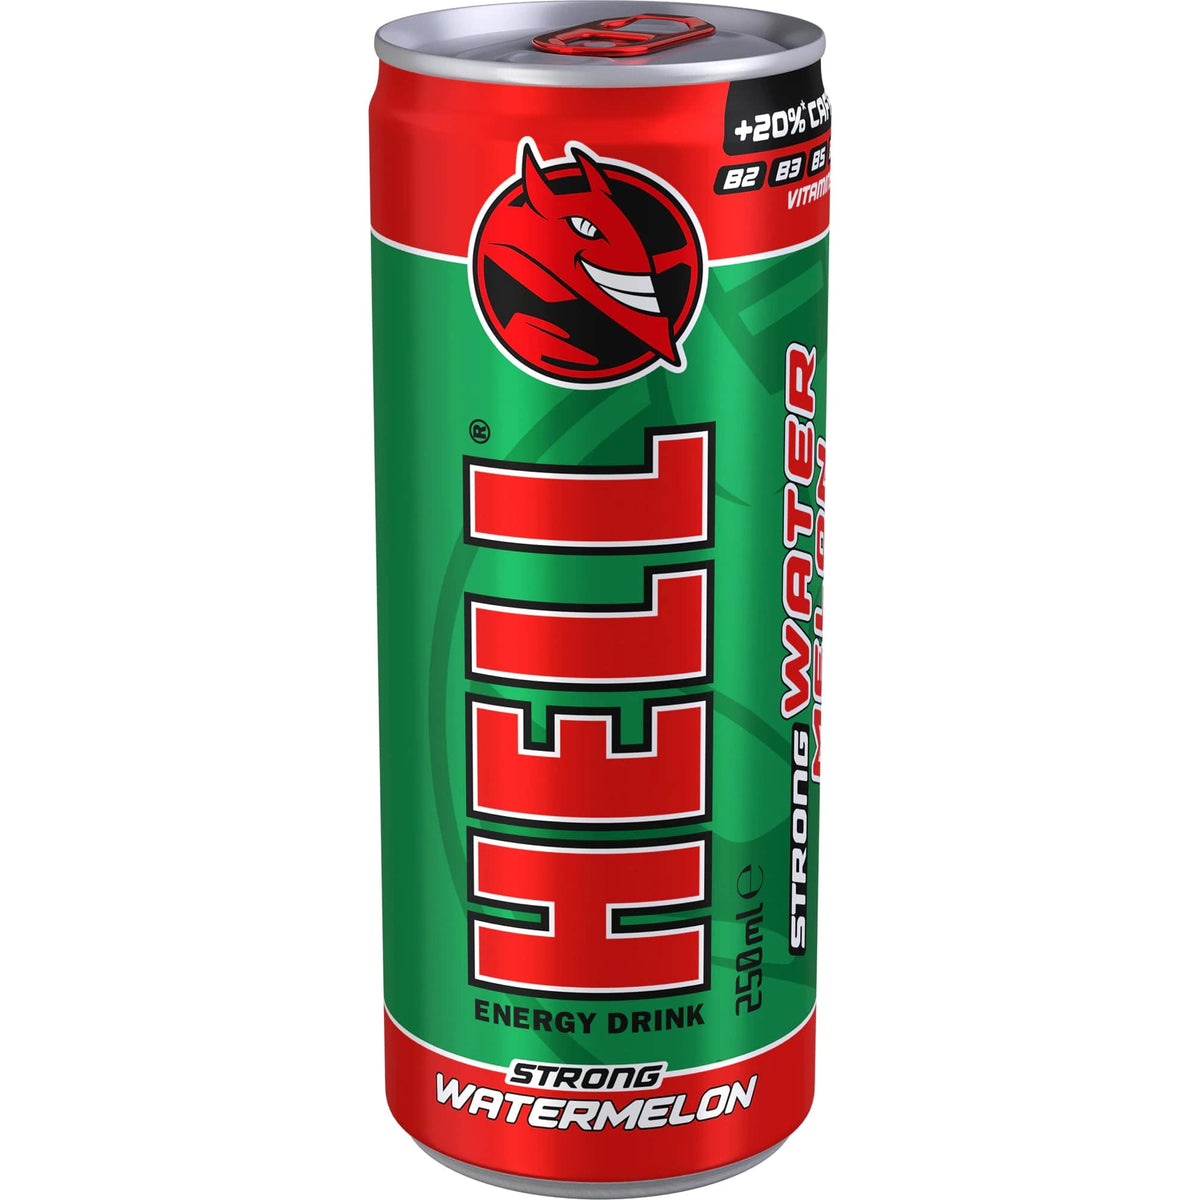 OBLIO DISCOUNTER ENERGIZANT HELL 250ML STRONG WATERMELON (24)